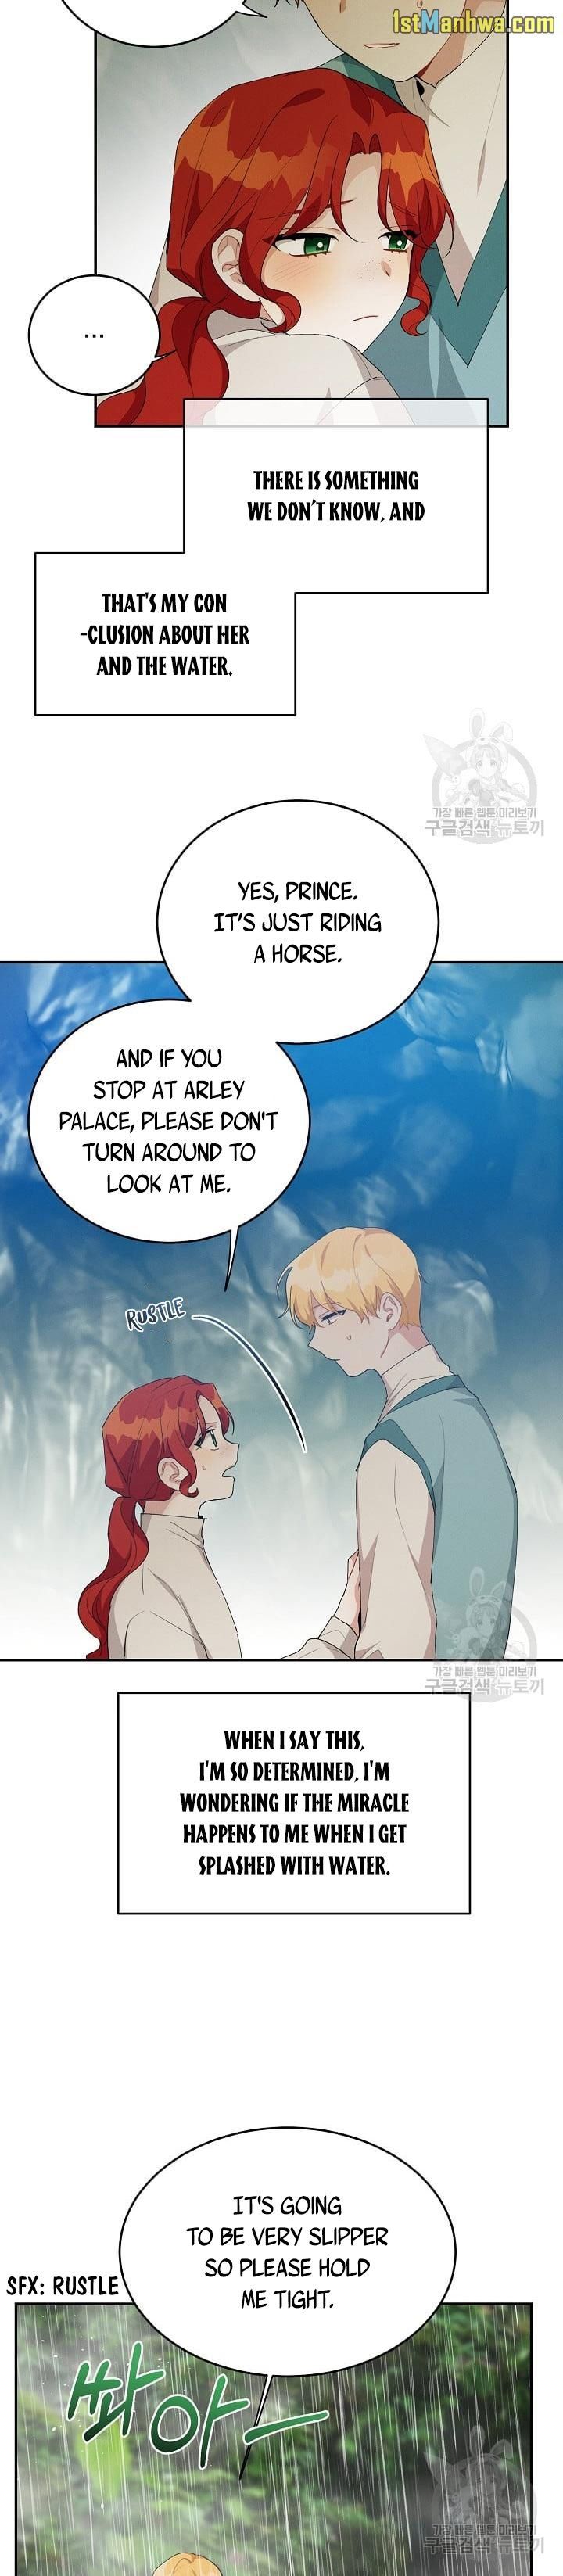 Answer Me, My Prince Chapter 37.5 page 5 - MangaWeebs.in